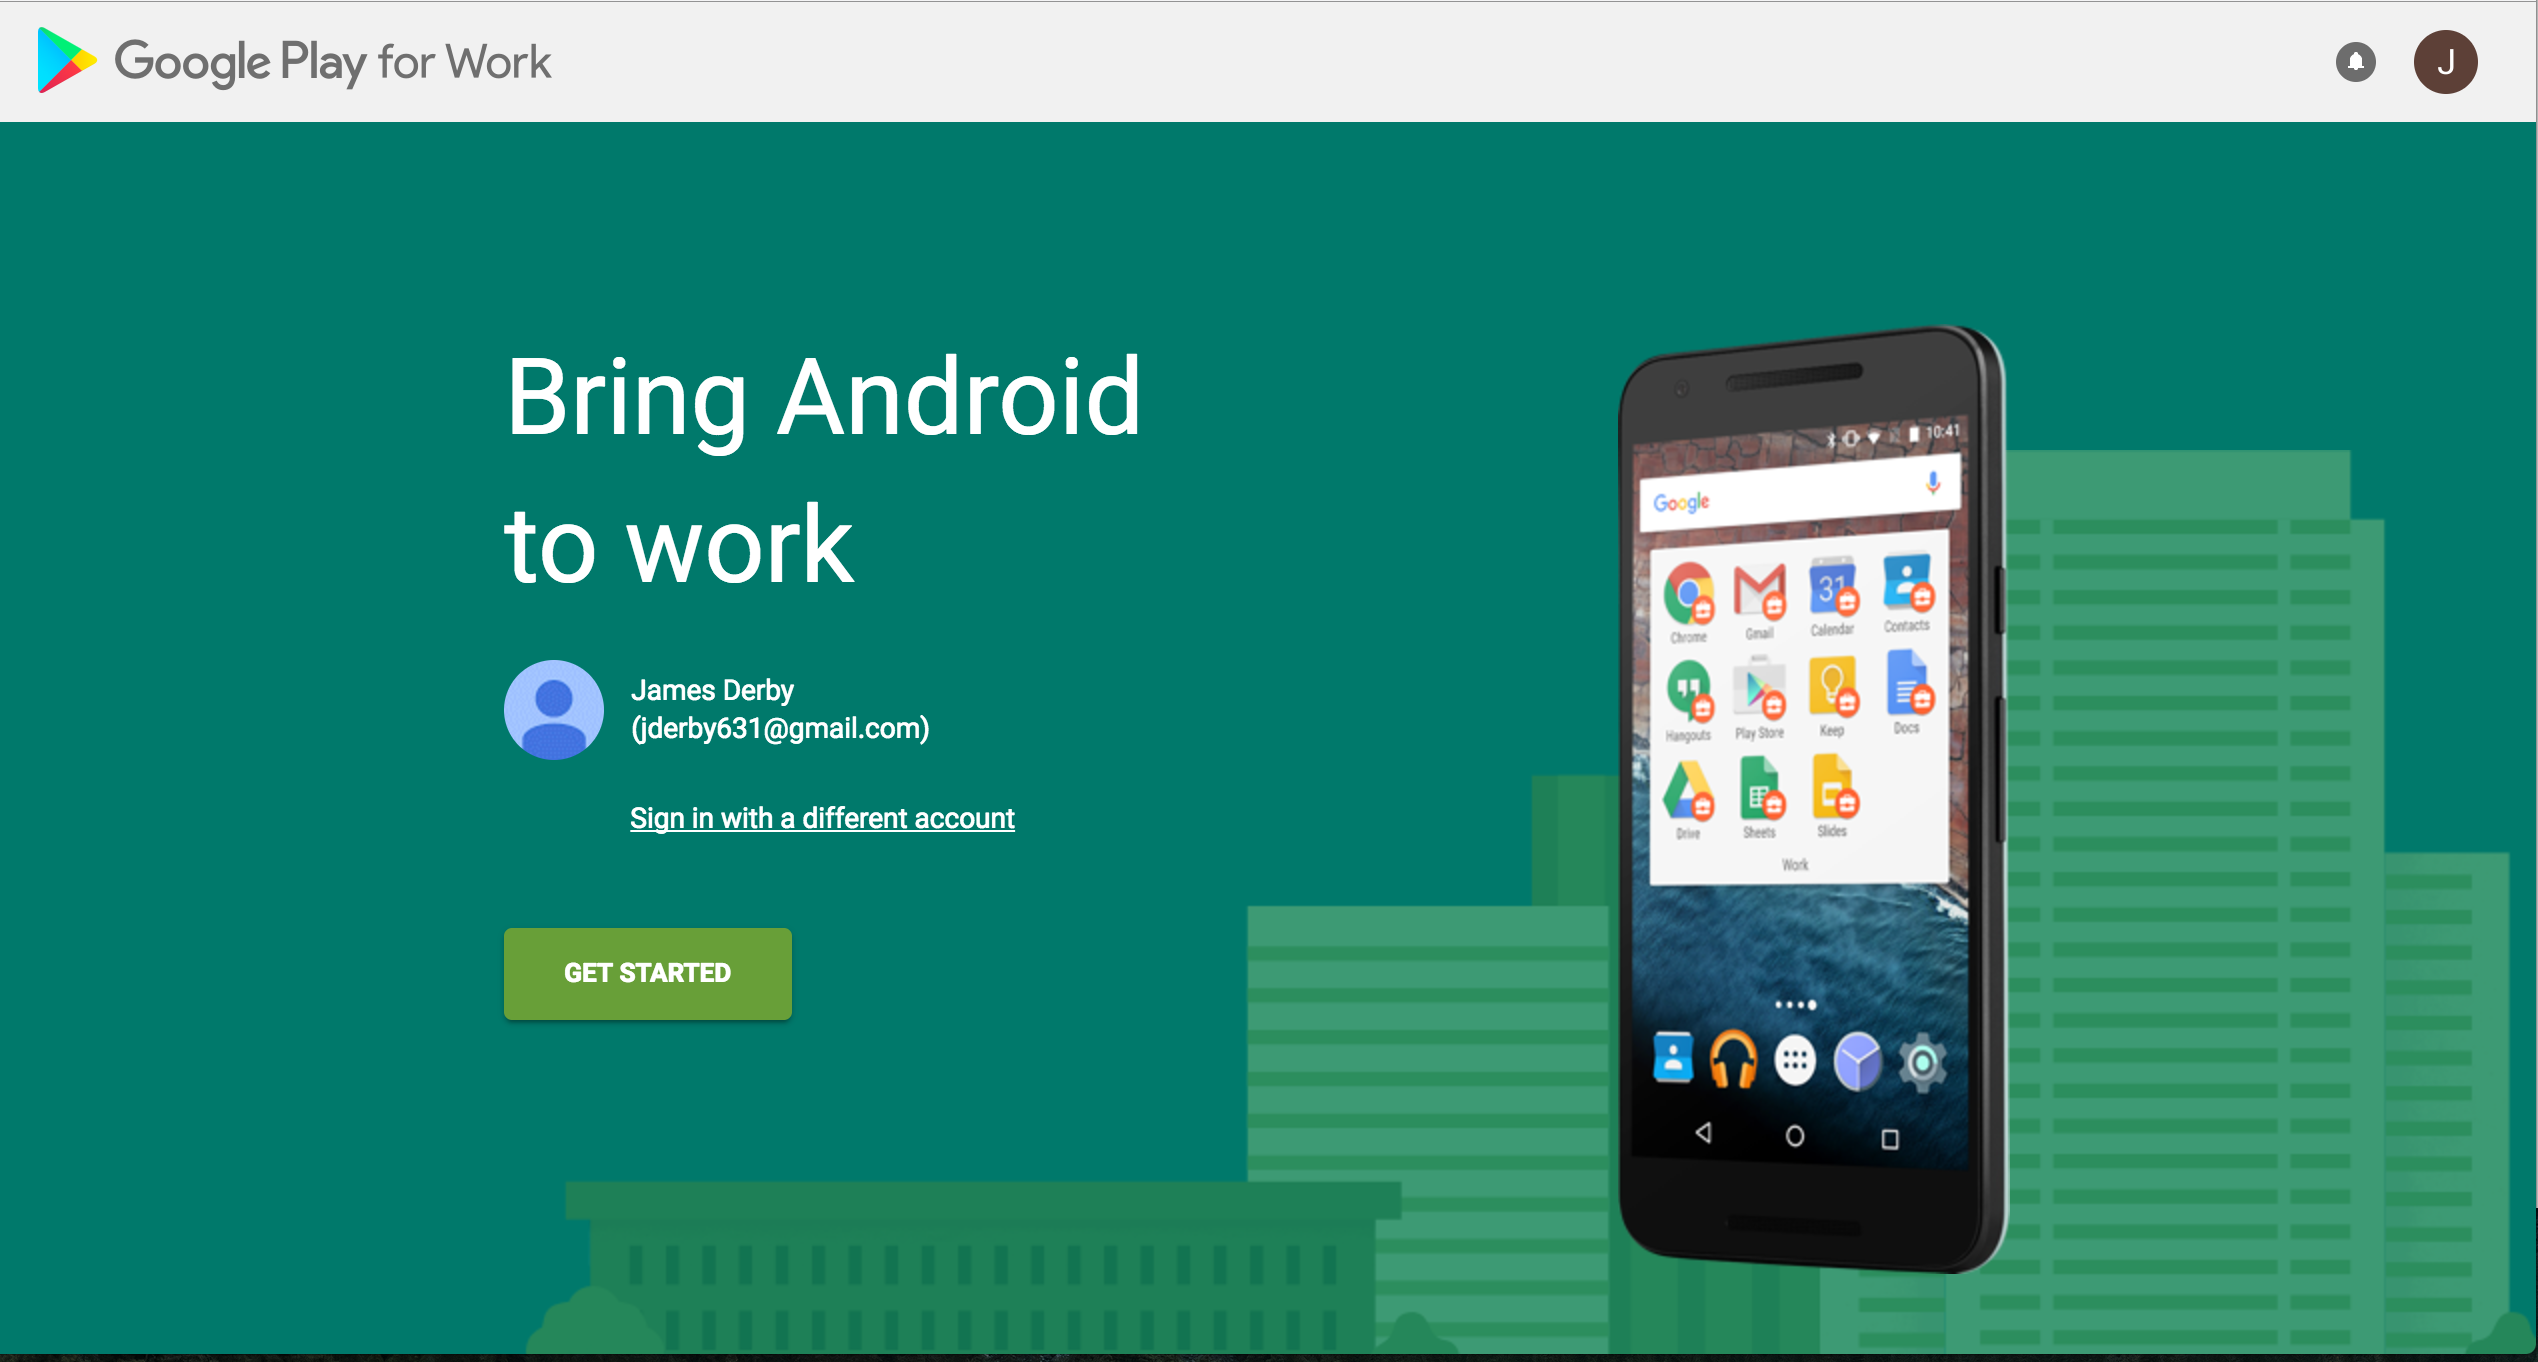 Bring Android to work details